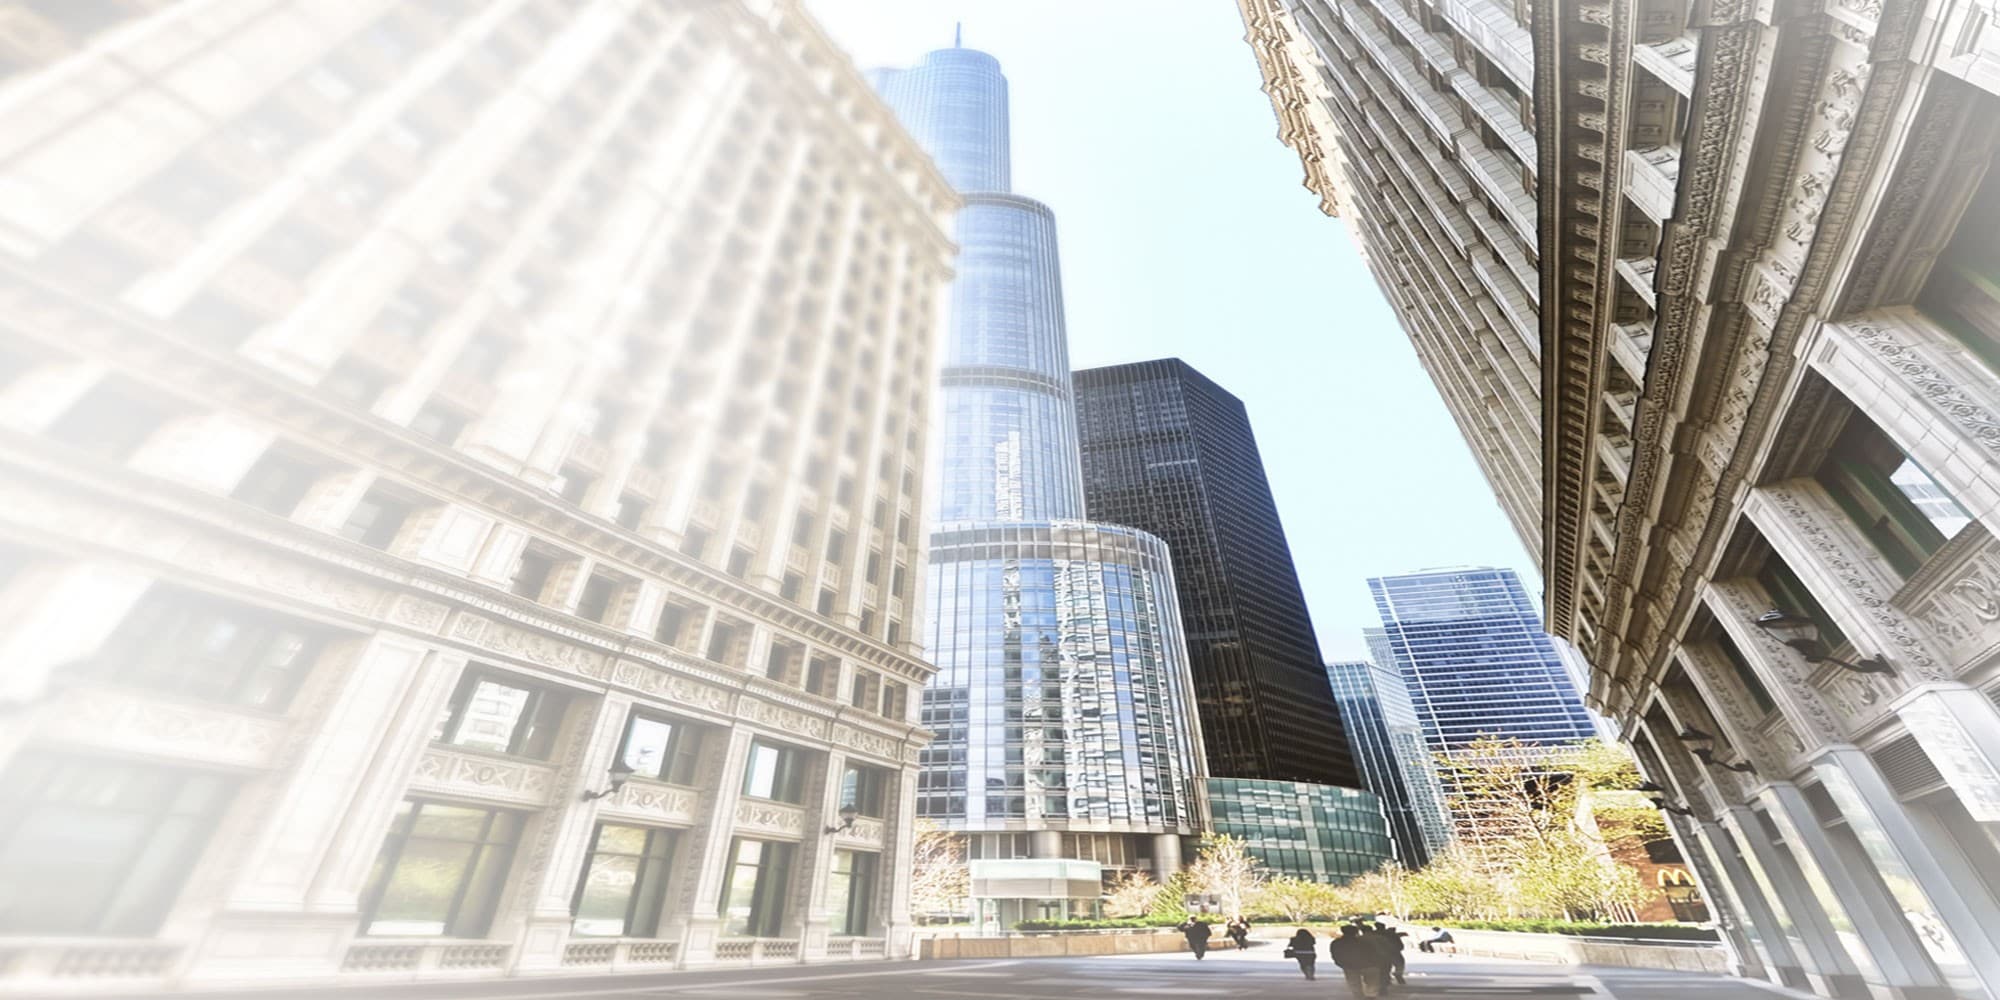 A street view of Chicago